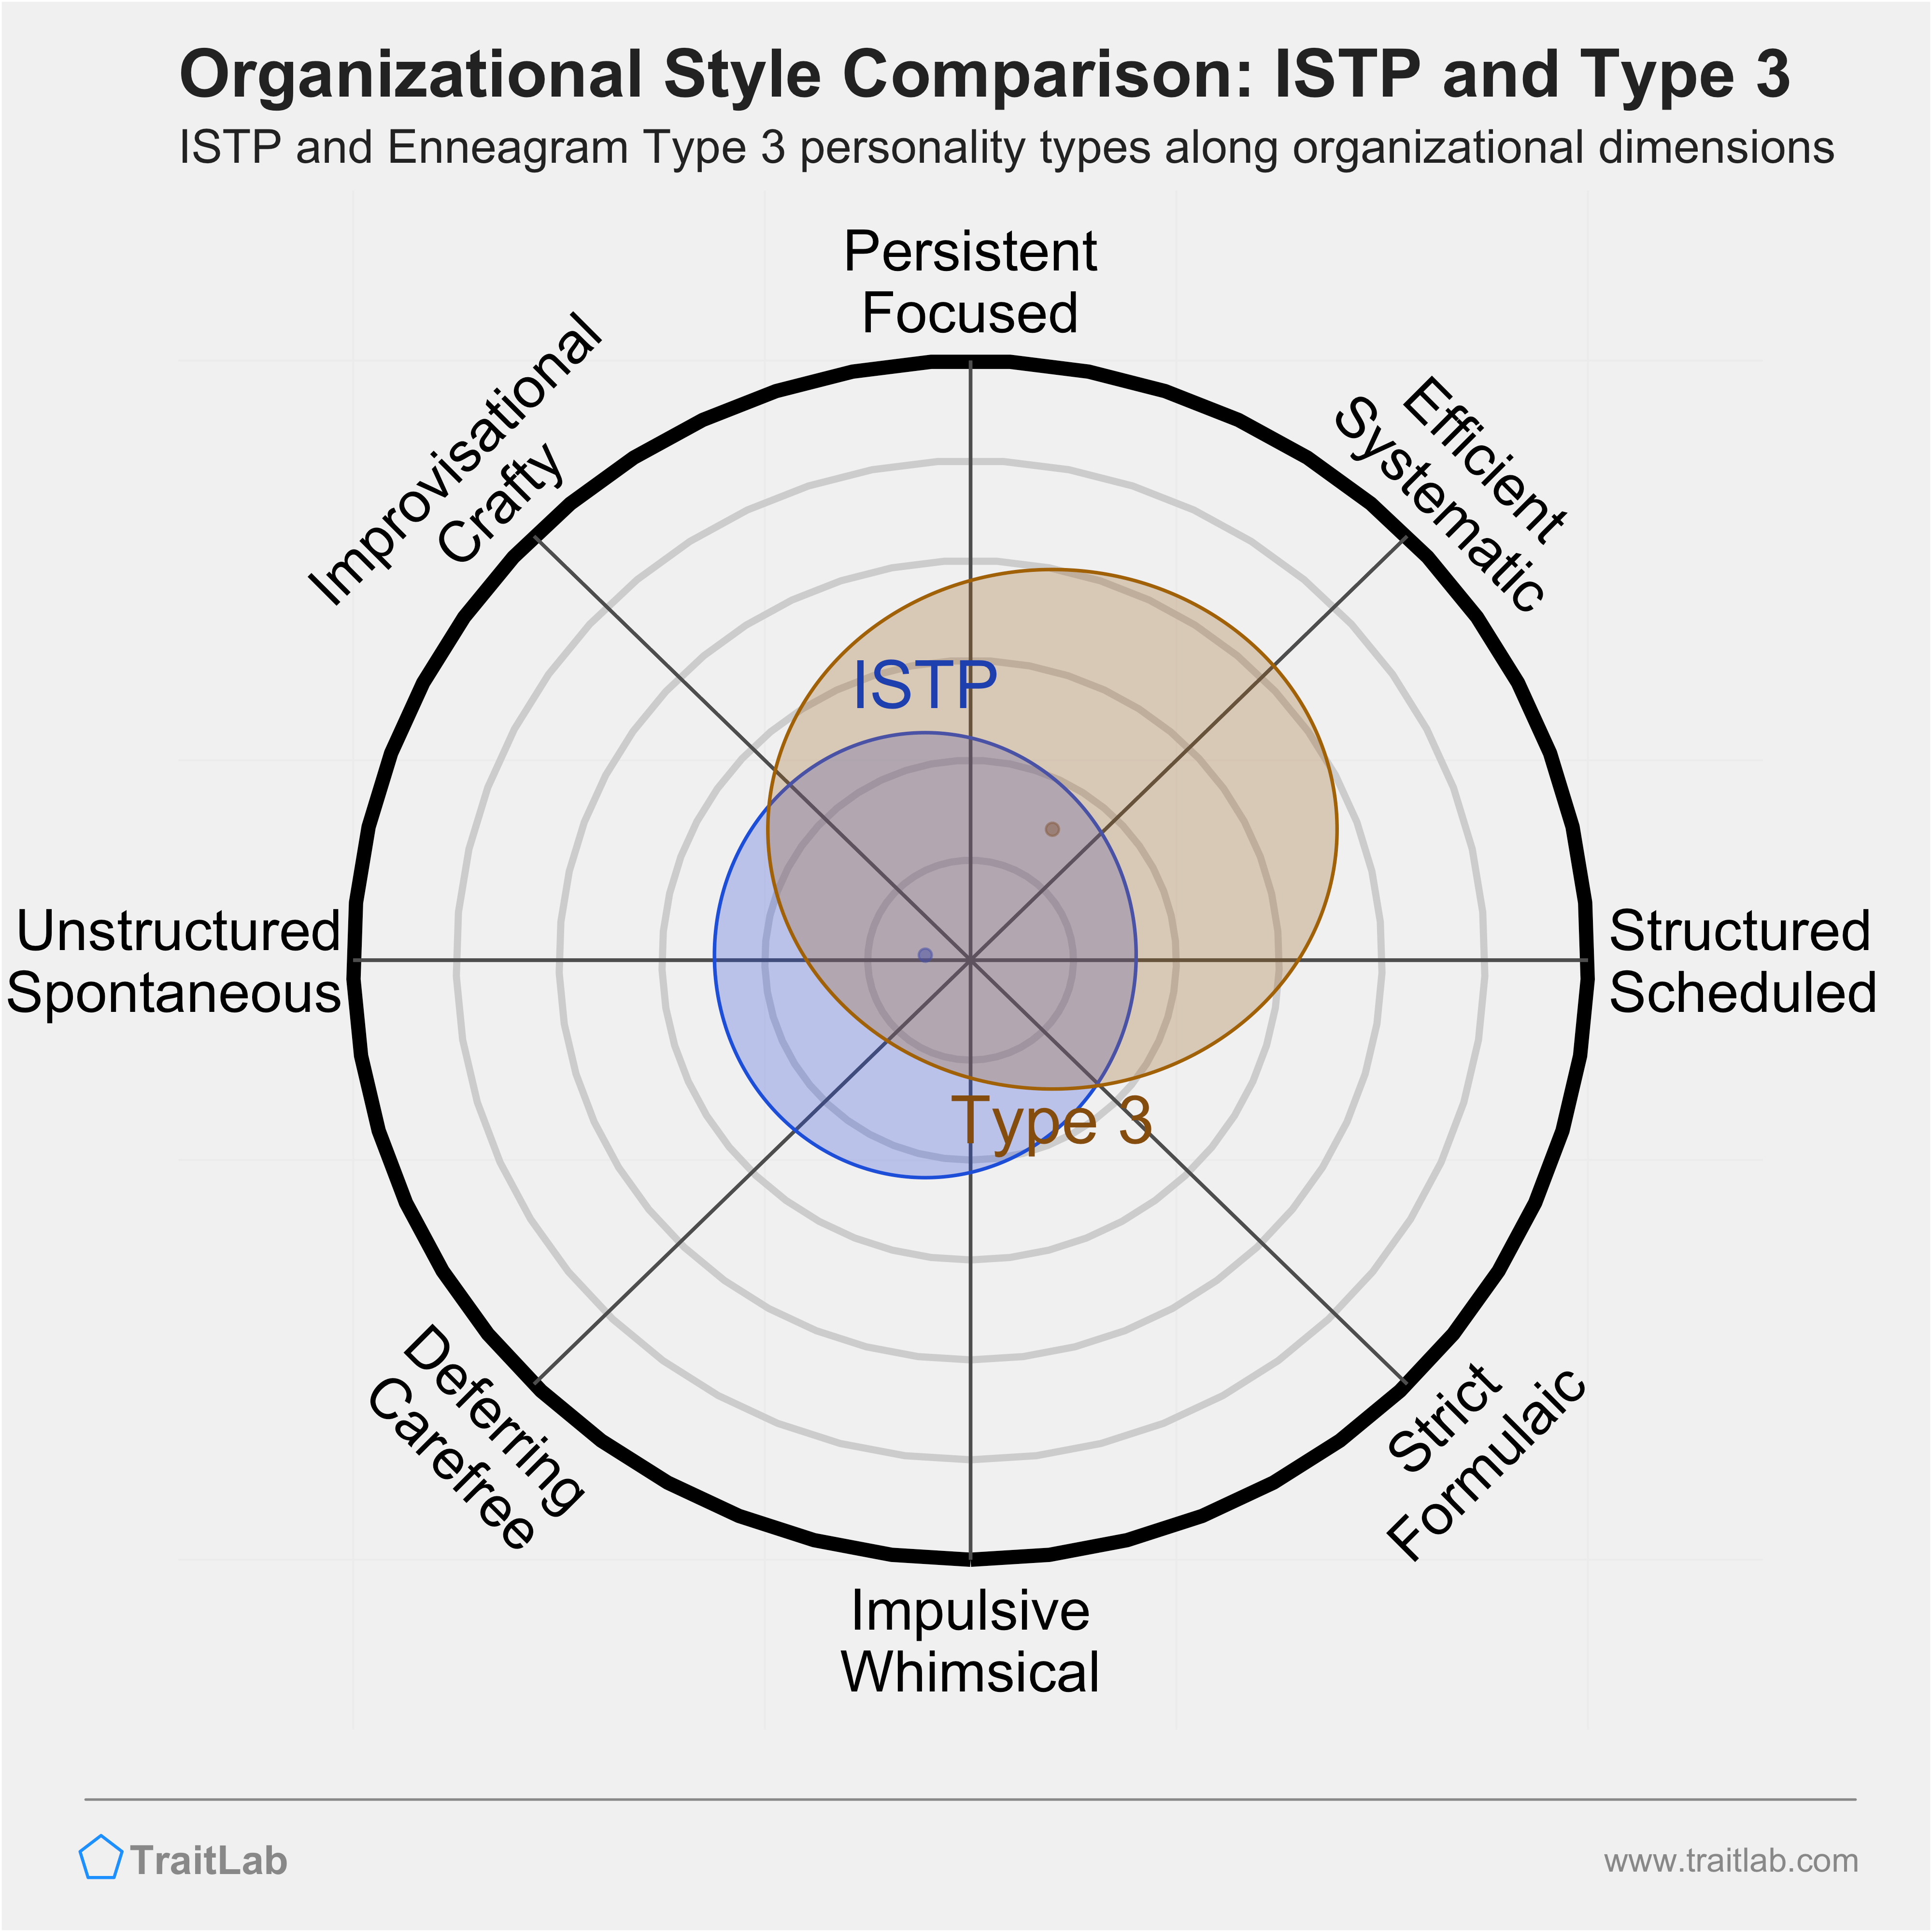 ISTP and Type 3 comparison across organizational dimensions